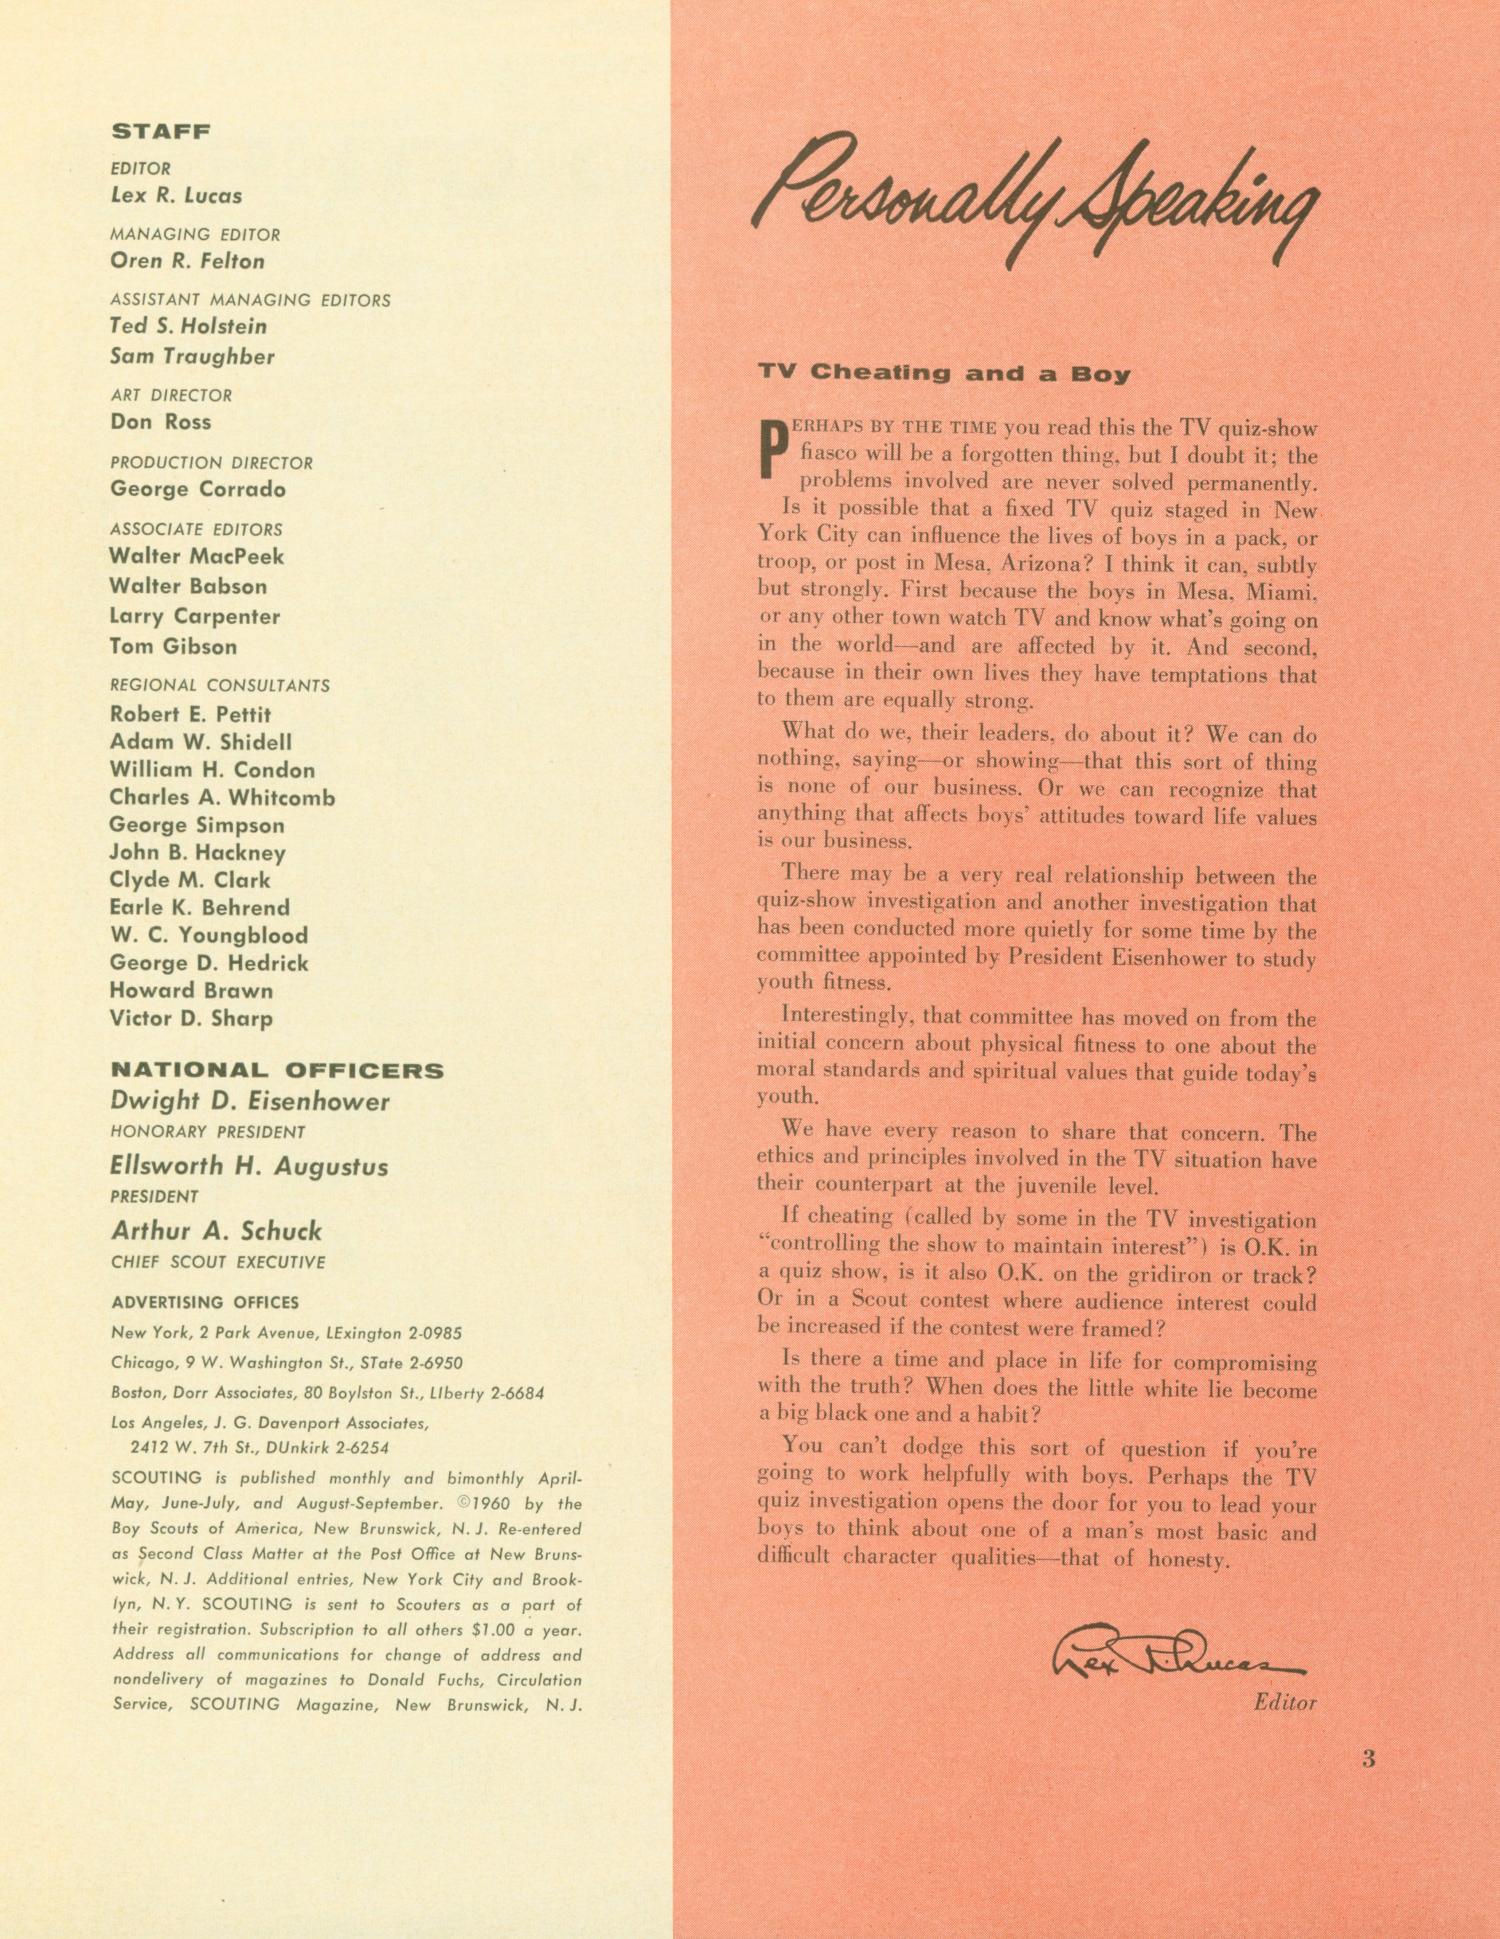 Scouting, Volume 48, Number 1, January 1960
                                                
                                                    3
                                                